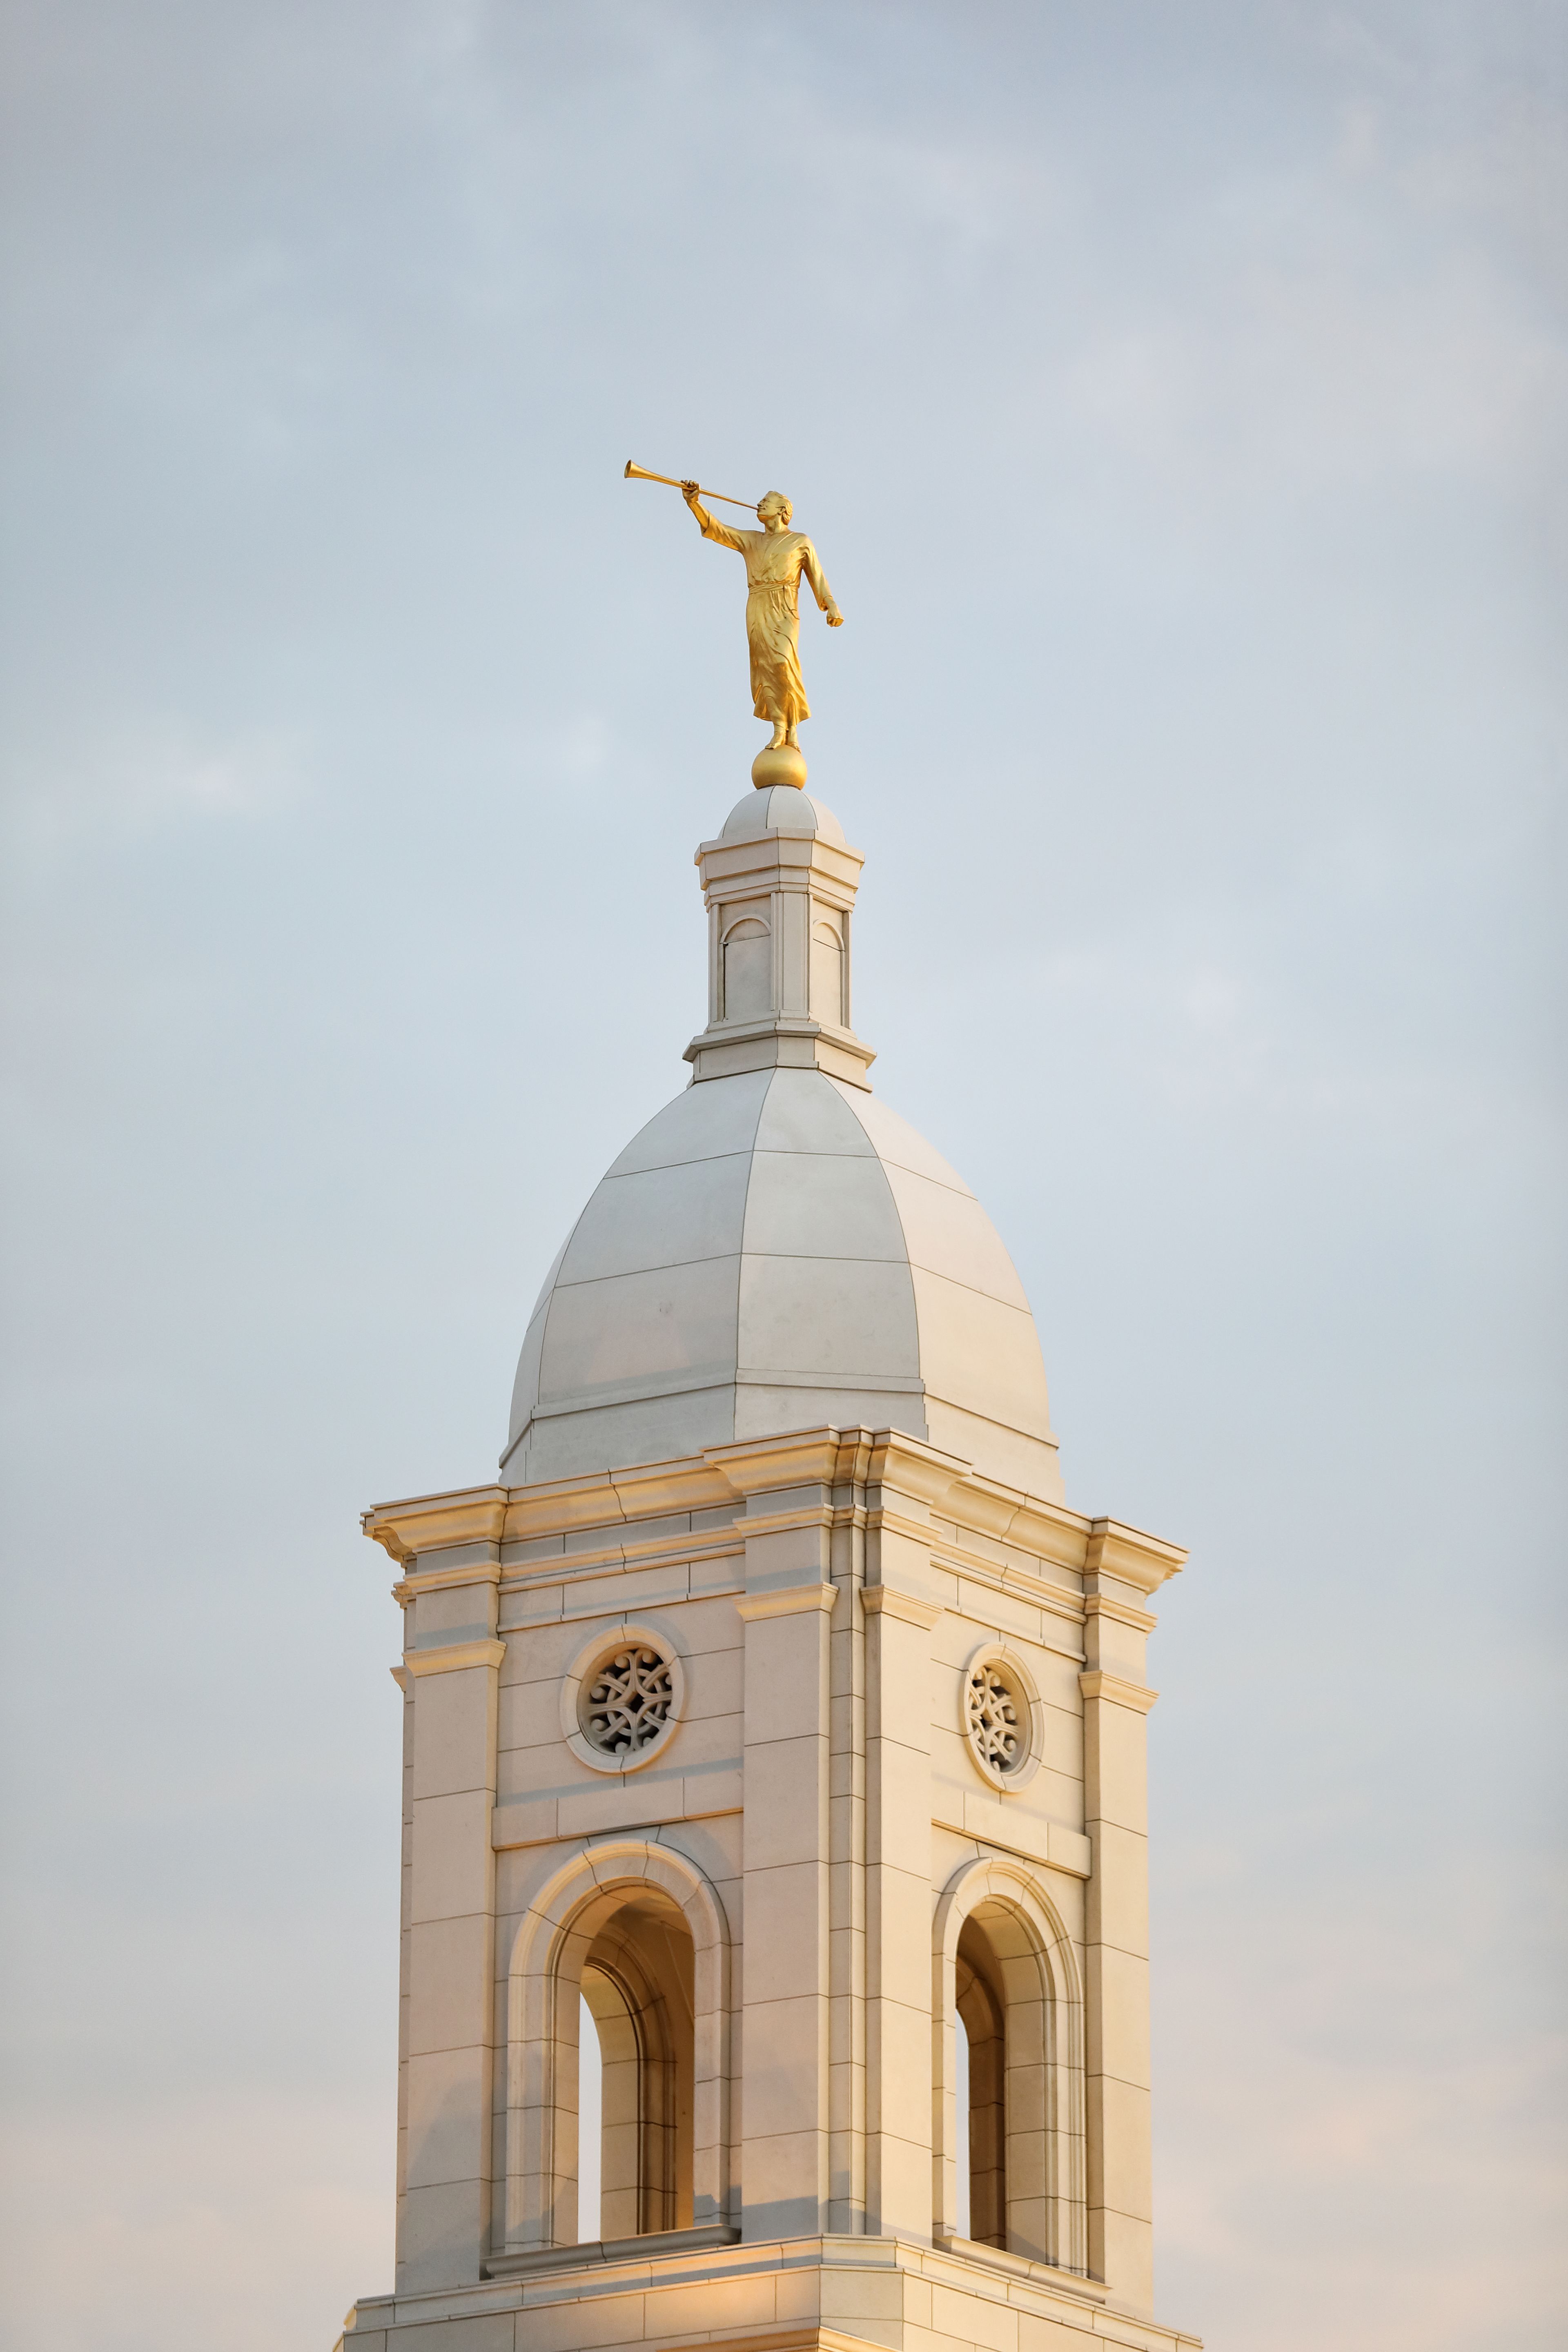 A close-up of the spire and the angel Moroni statue on the Barranquilla Colombia Temple.